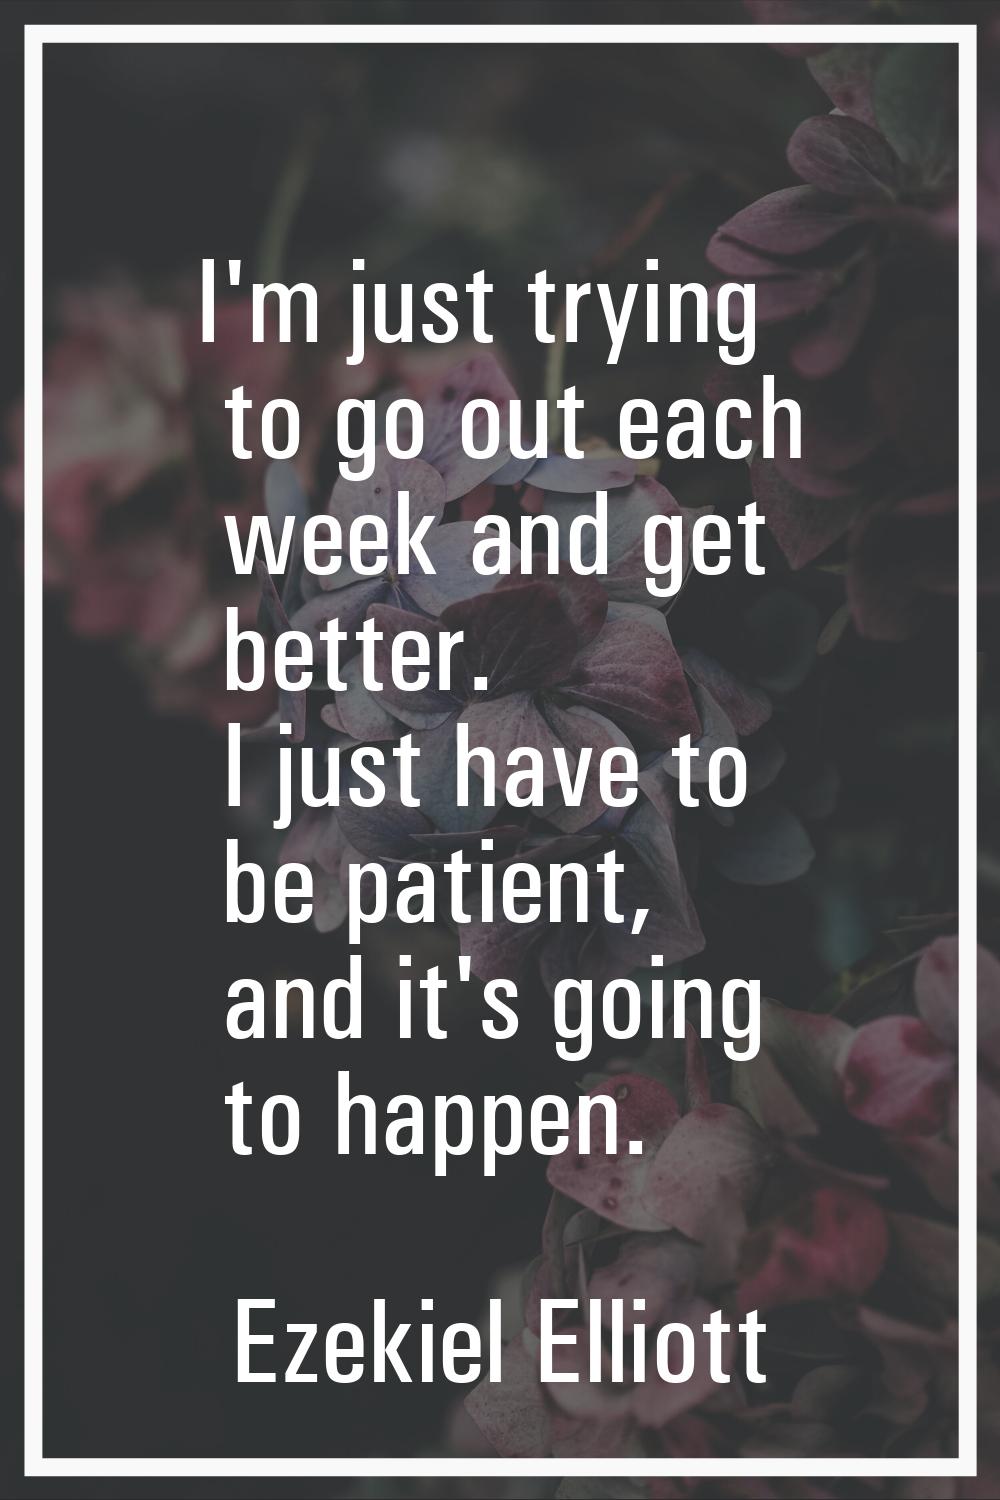 I'm just trying to go out each week and get better. I just have to be patient, and it's going to ha